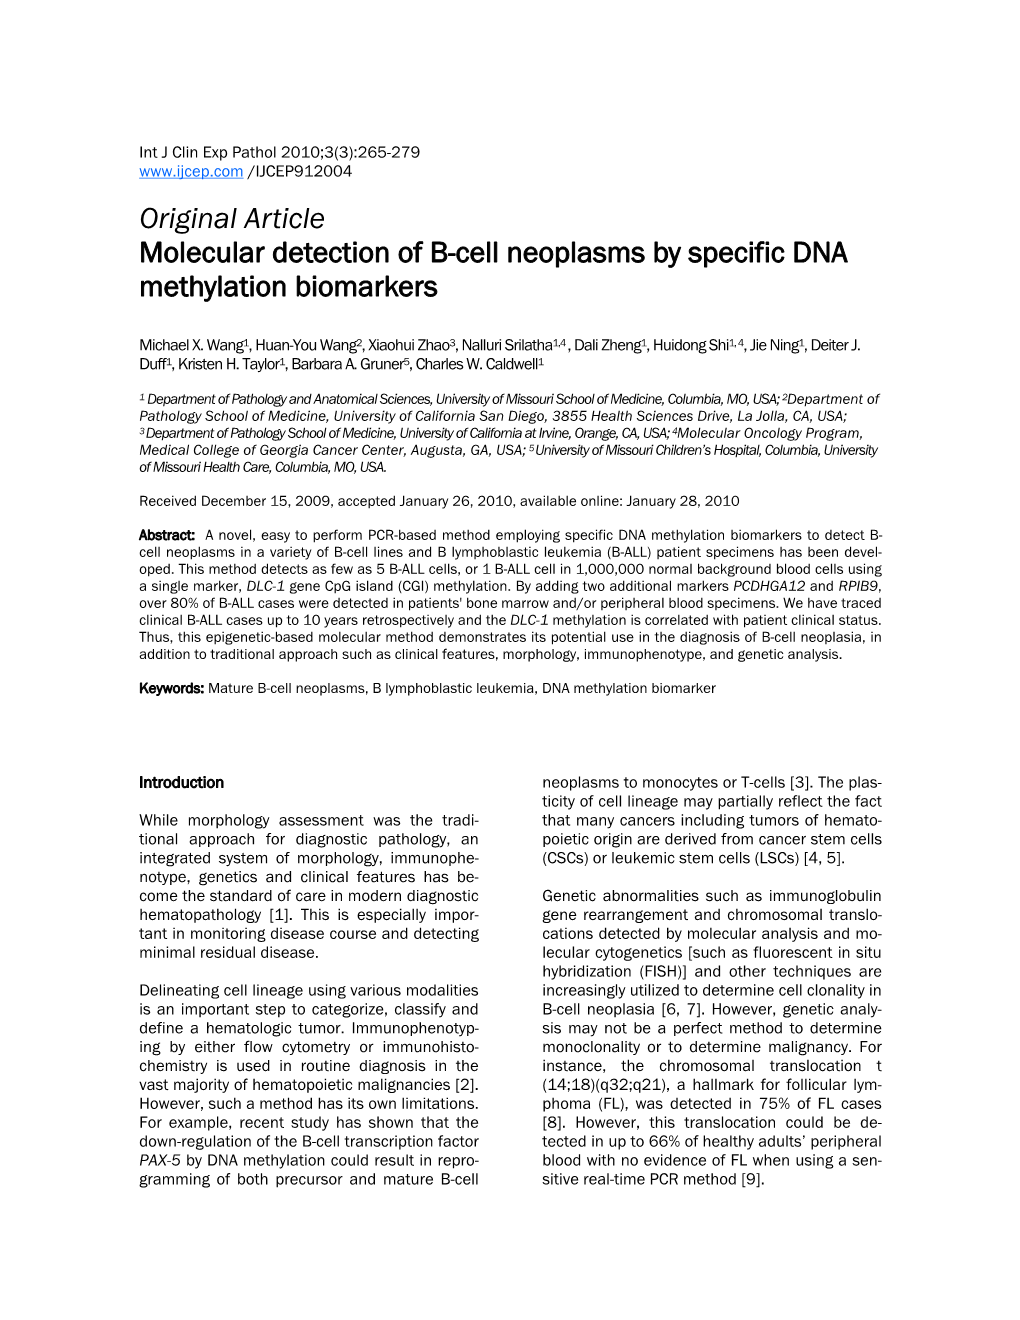 Original Article Molecular Detection of B-Cell Neoplasms by Specific DNA Methylation Biomarkers